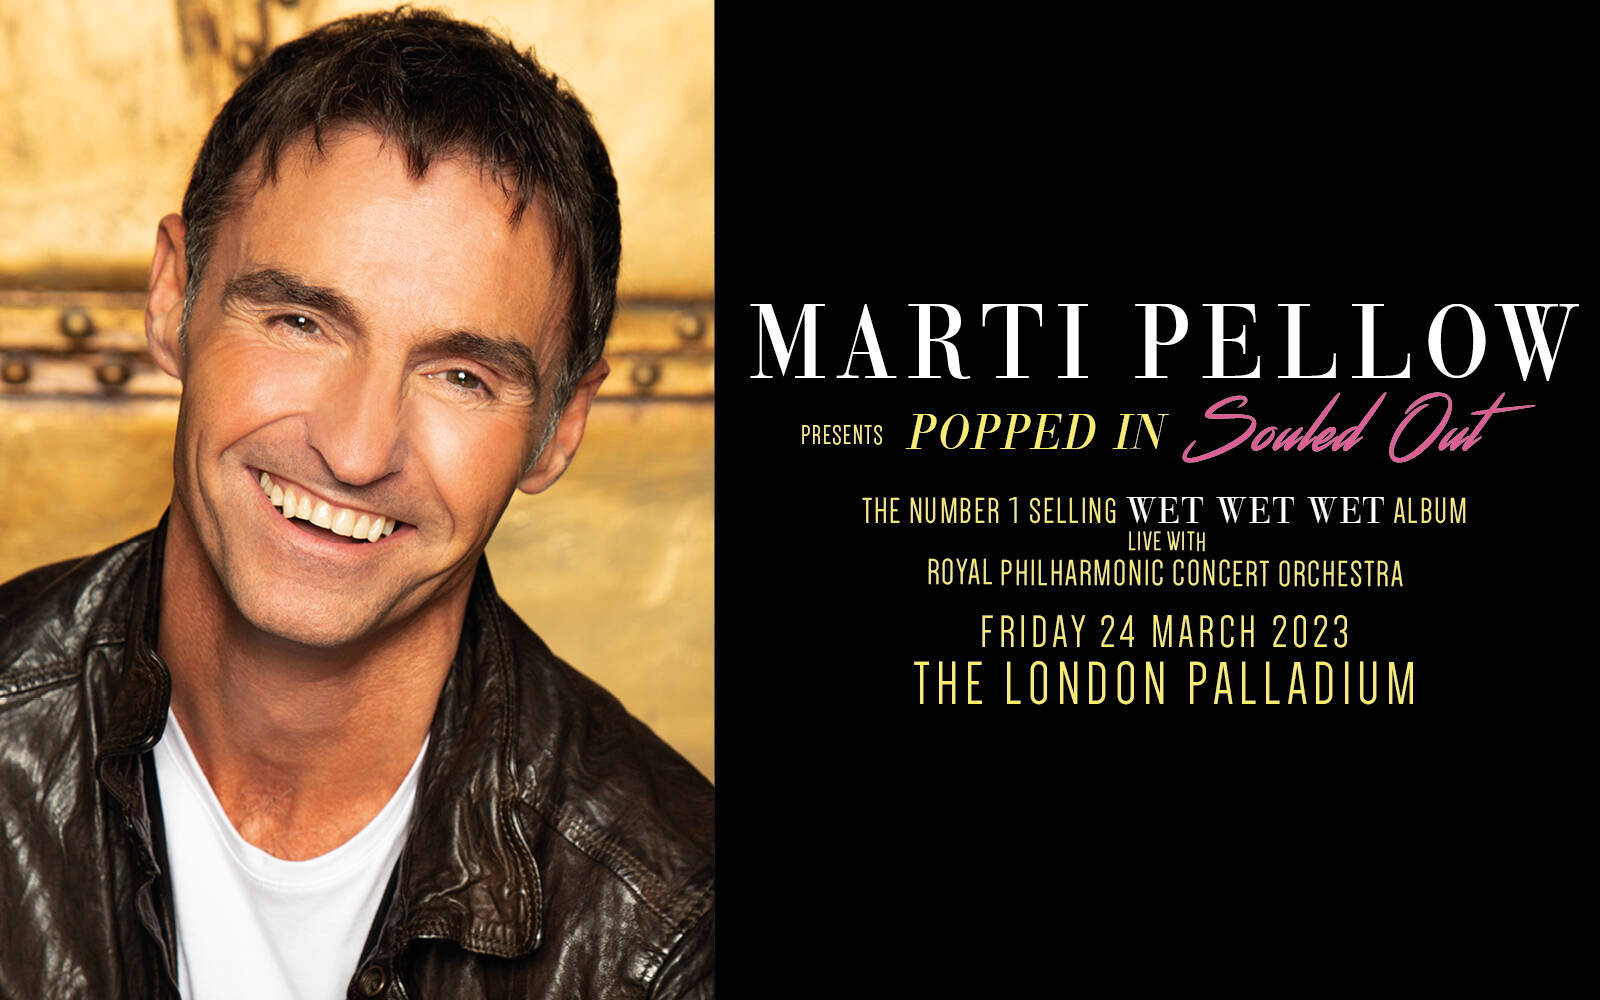 marti pellow tour support act